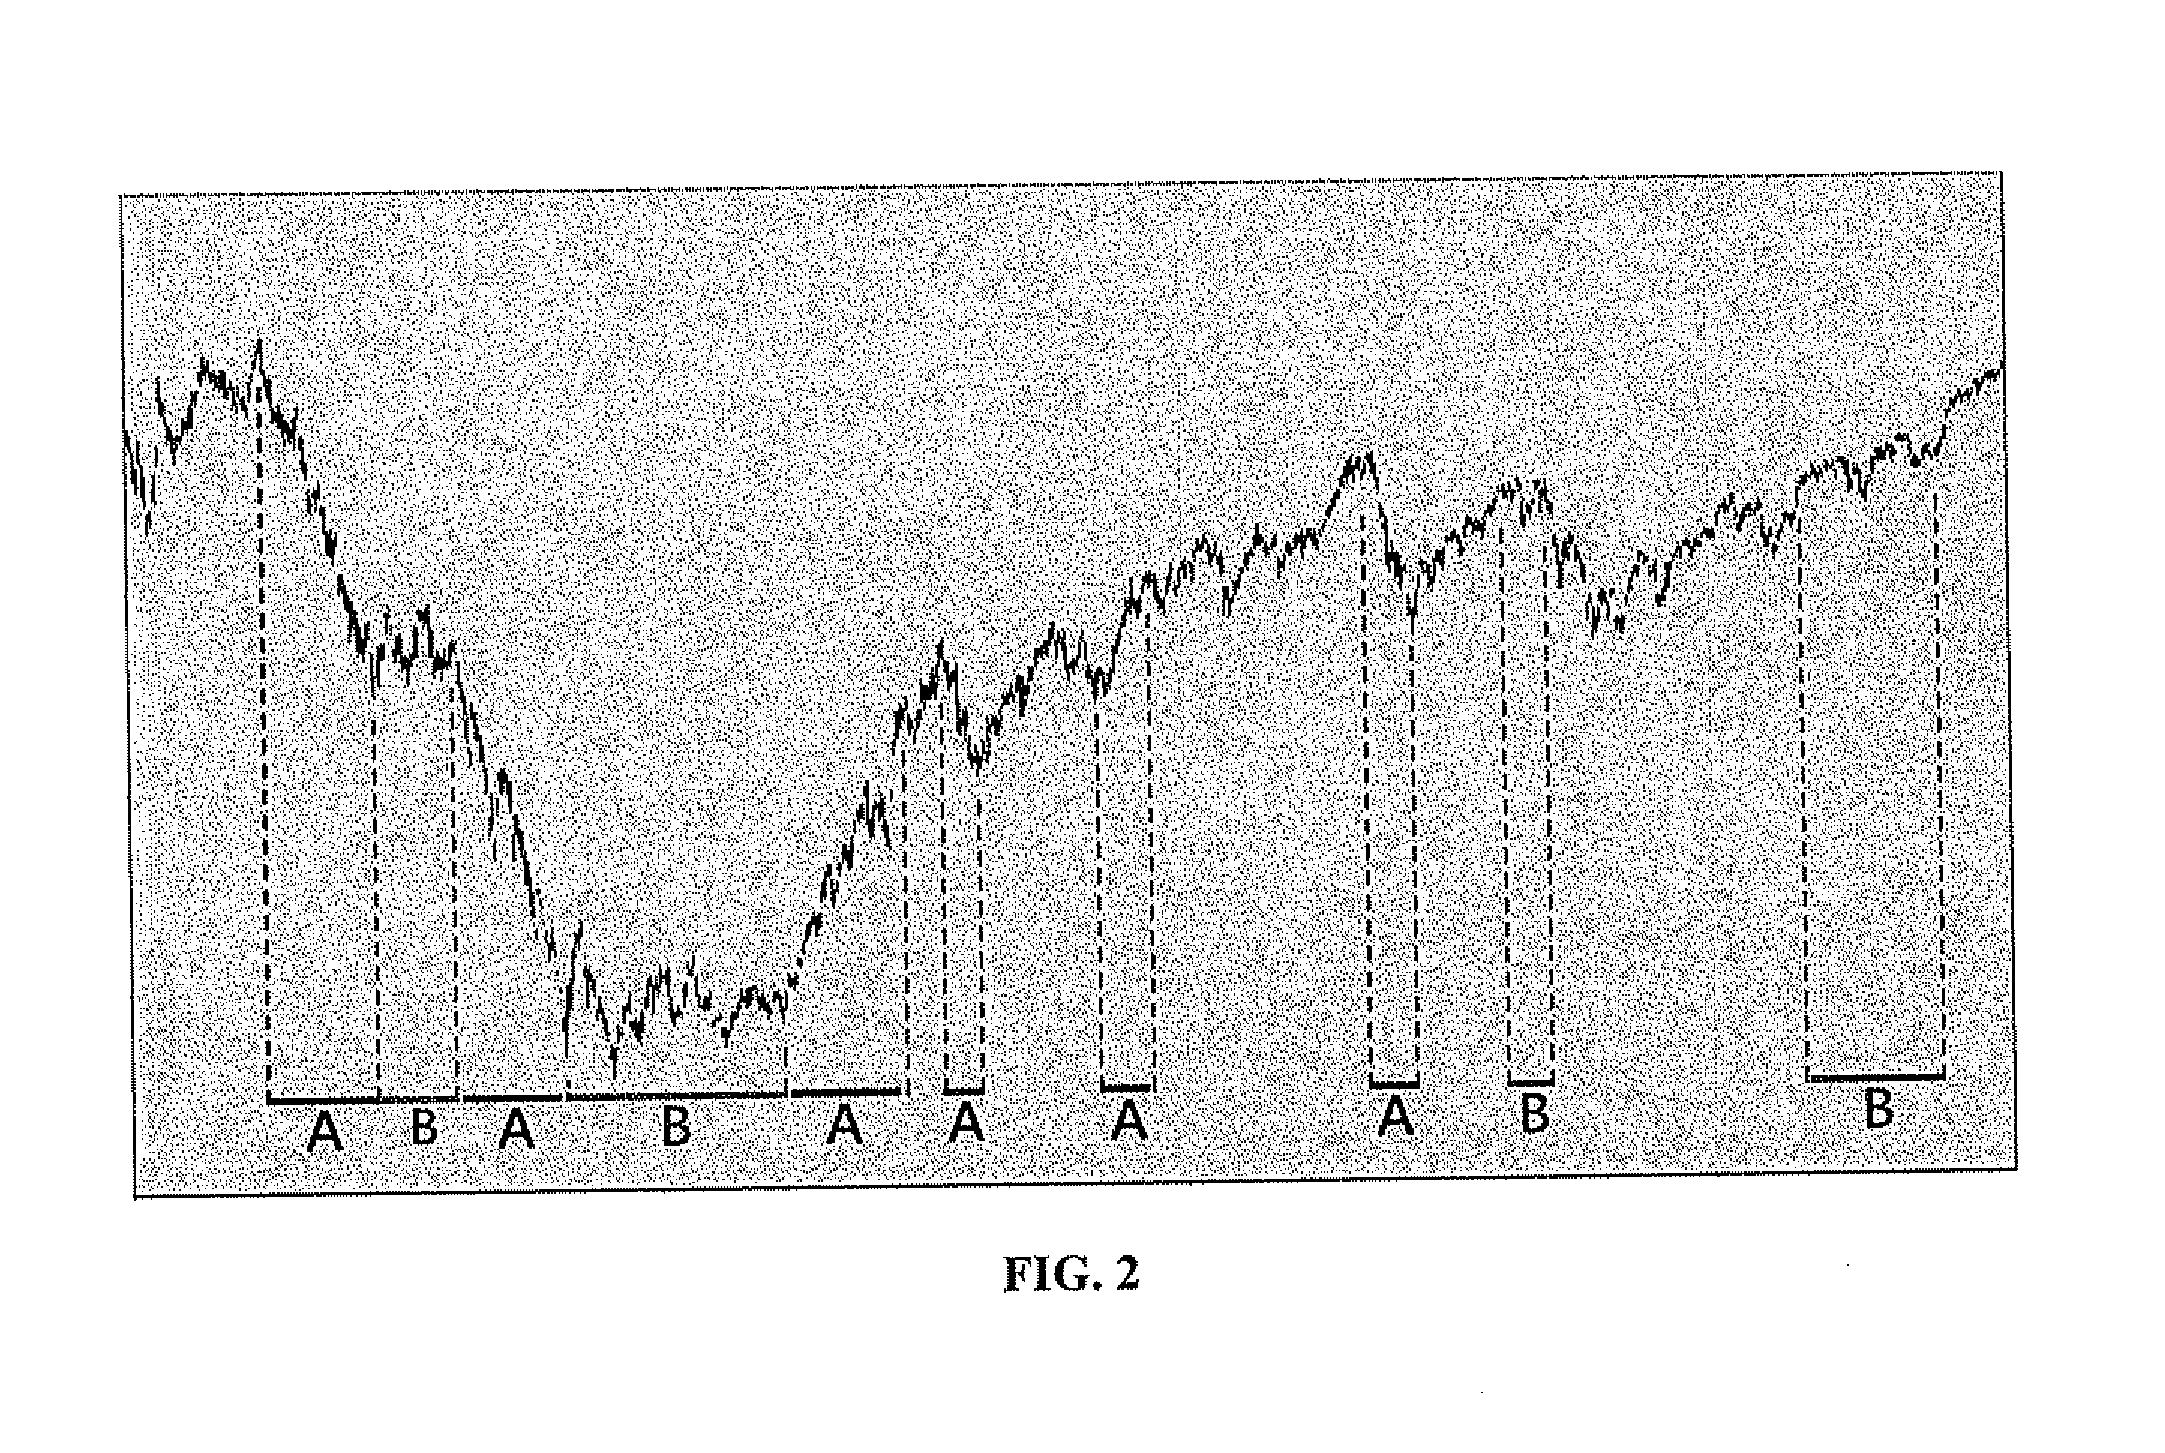 State-based trading management system and method